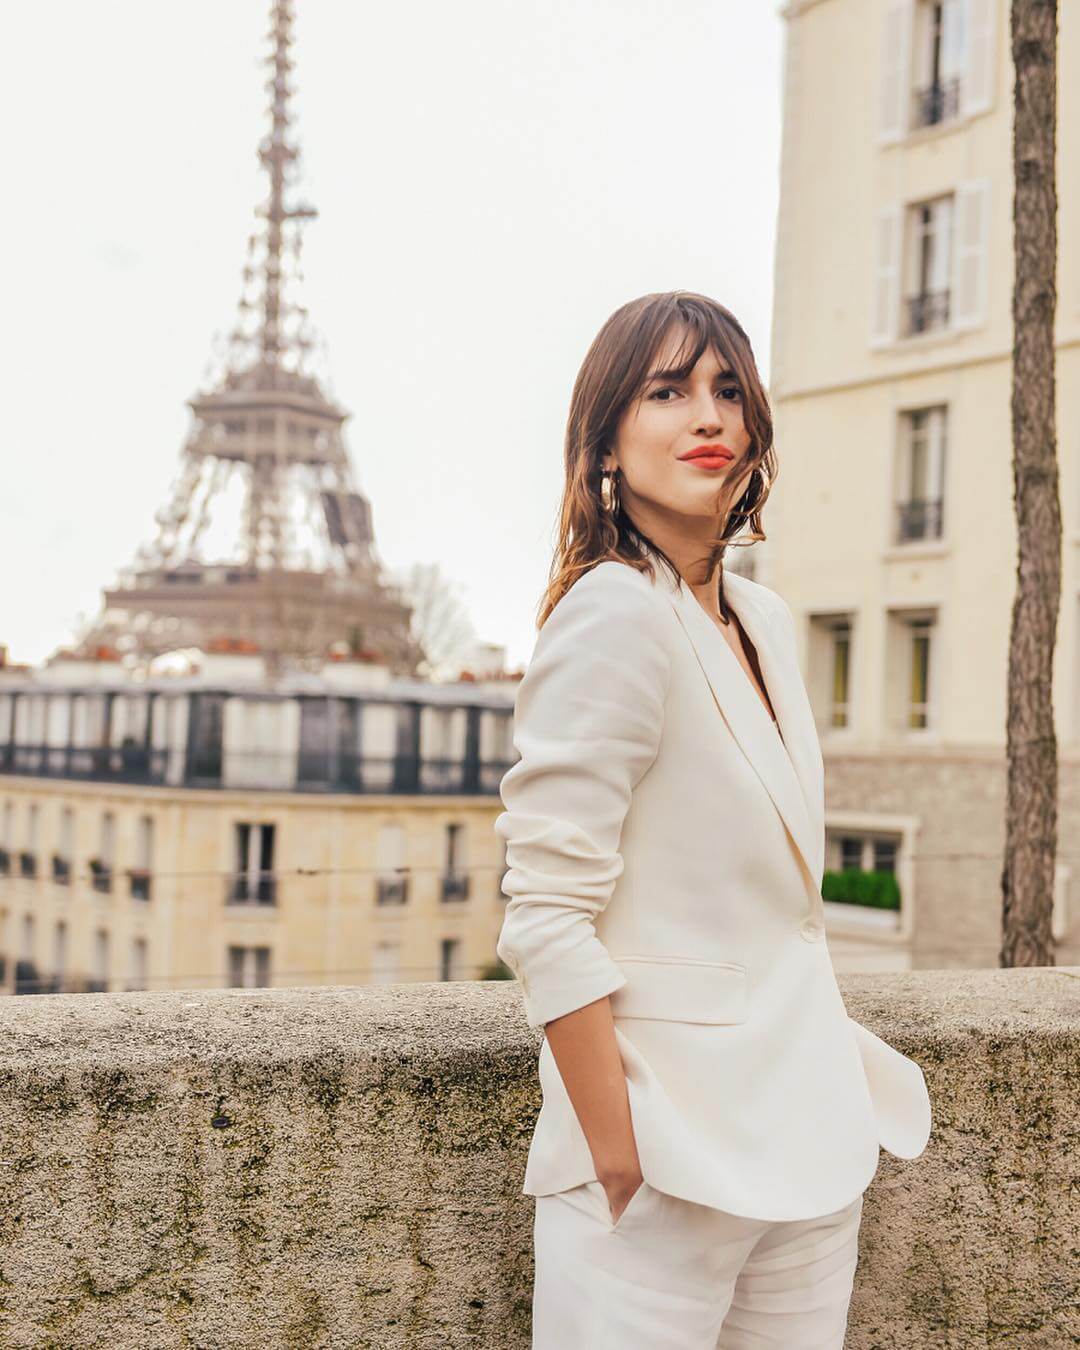 49 Hot Pictures of Jeanne Damas Will Make You Jump With Joy | Best Of Comic Books